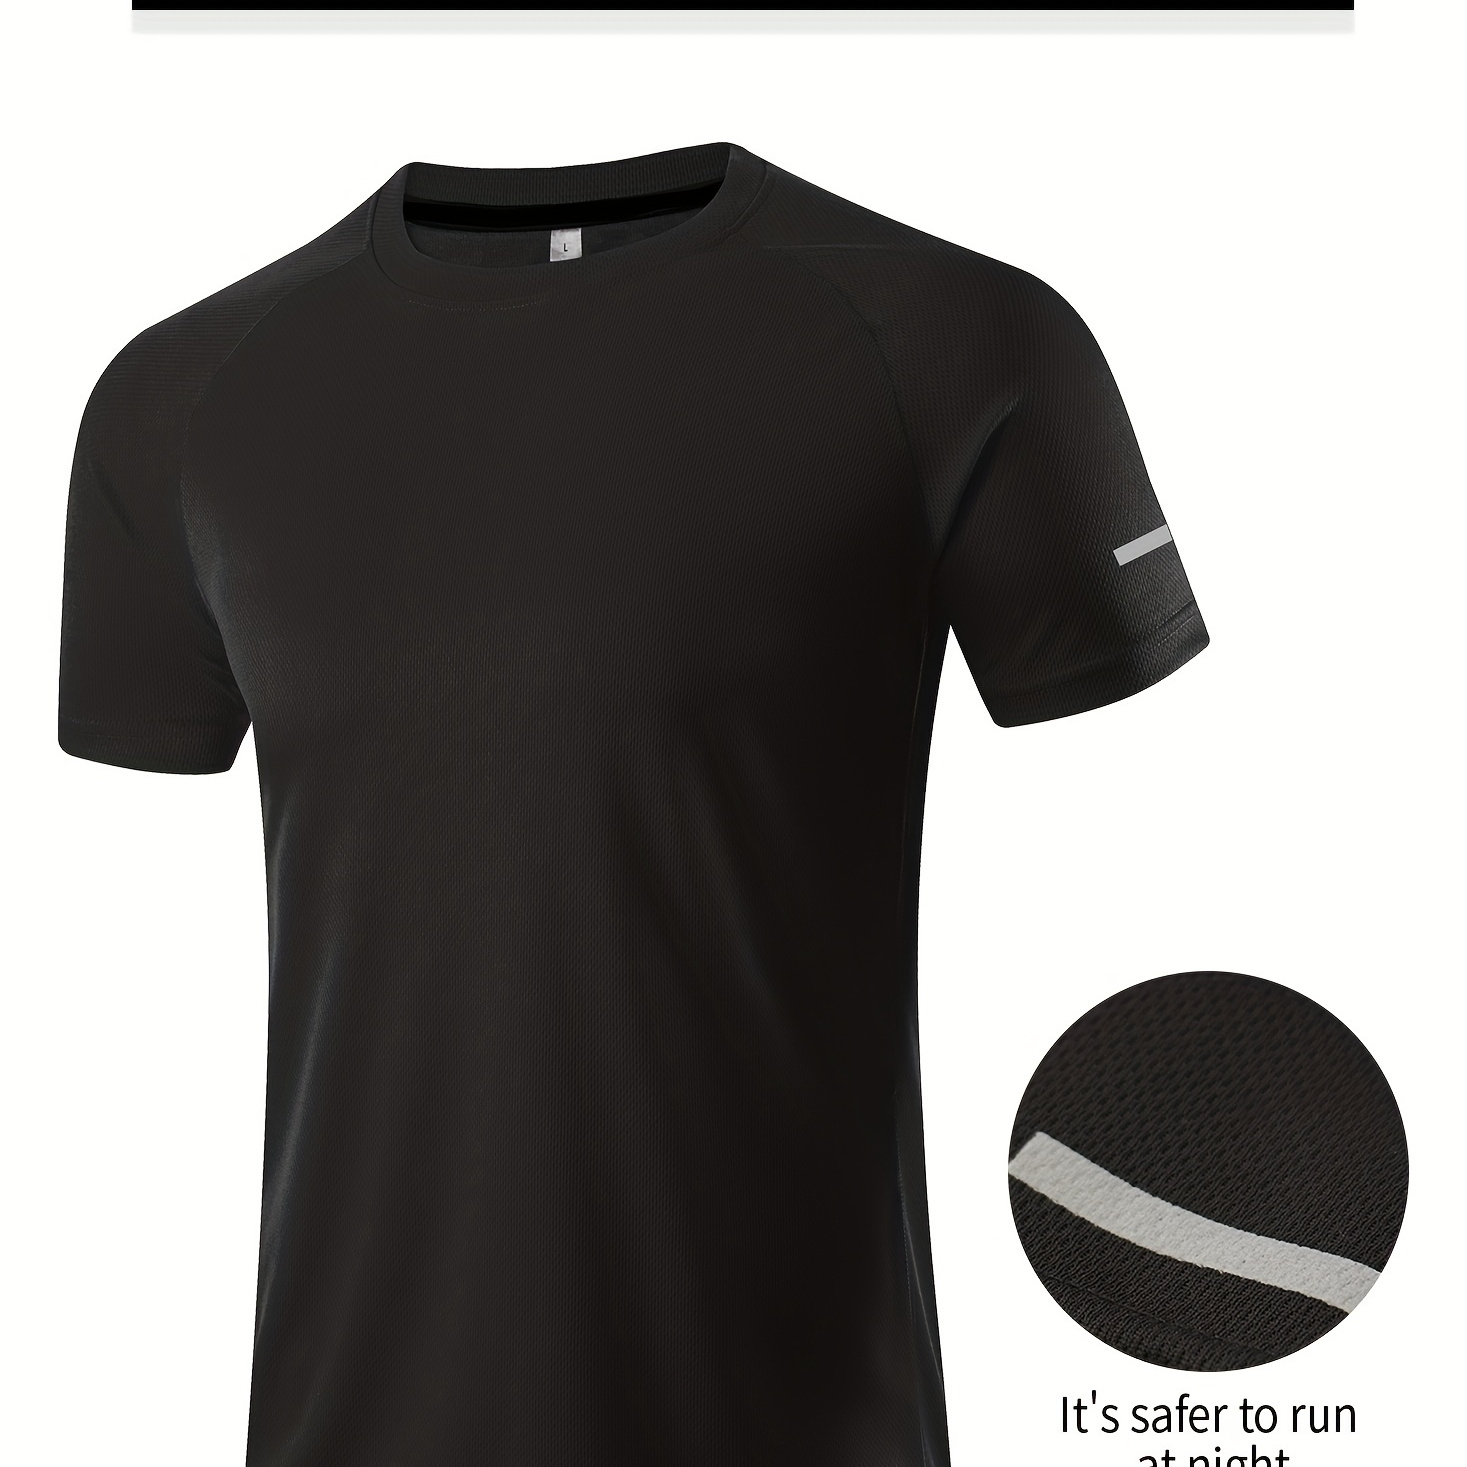 

Men's Quick-drying Performance Tee, Breathable And Comfortable Crew Neck Slightly Stretch T-shirt For Gym, Sports, Training, And Running